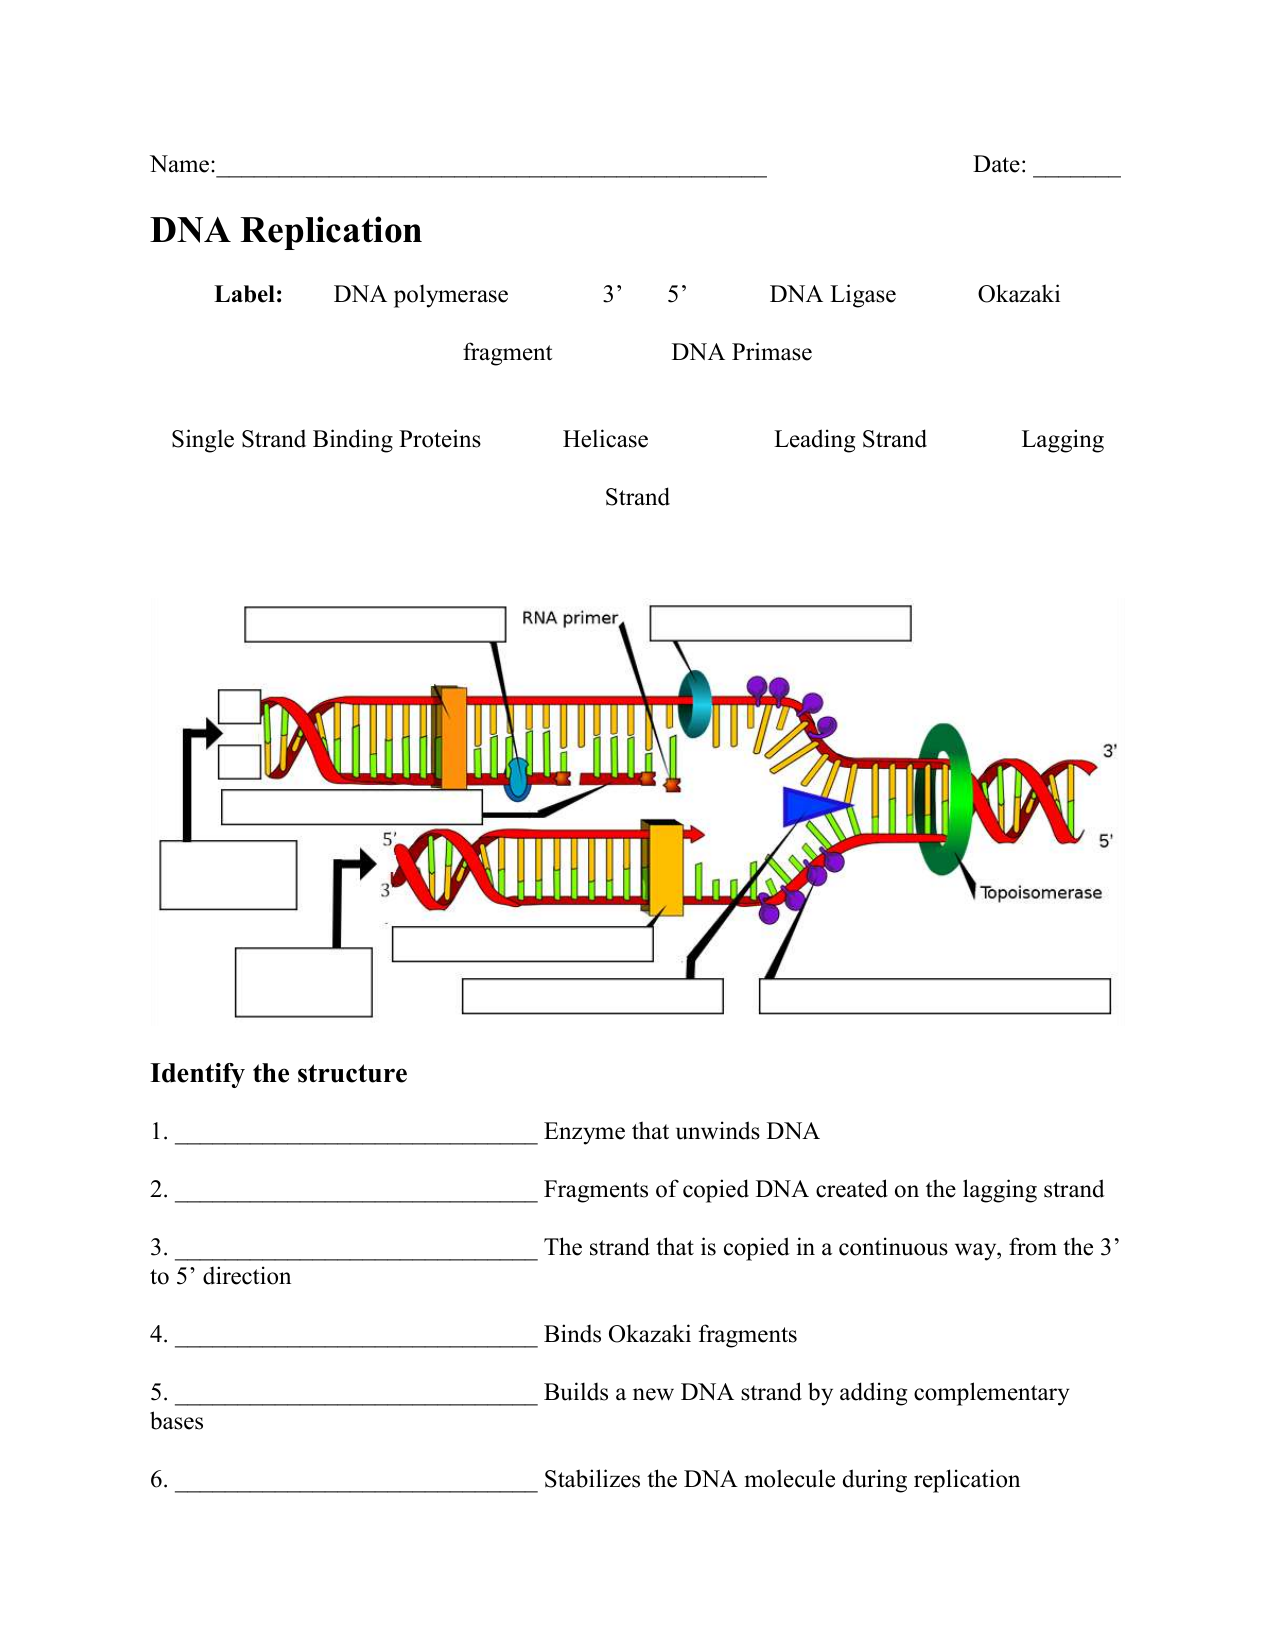 ib-dna-structure-replication-review-key-2-6-2-7-7-1